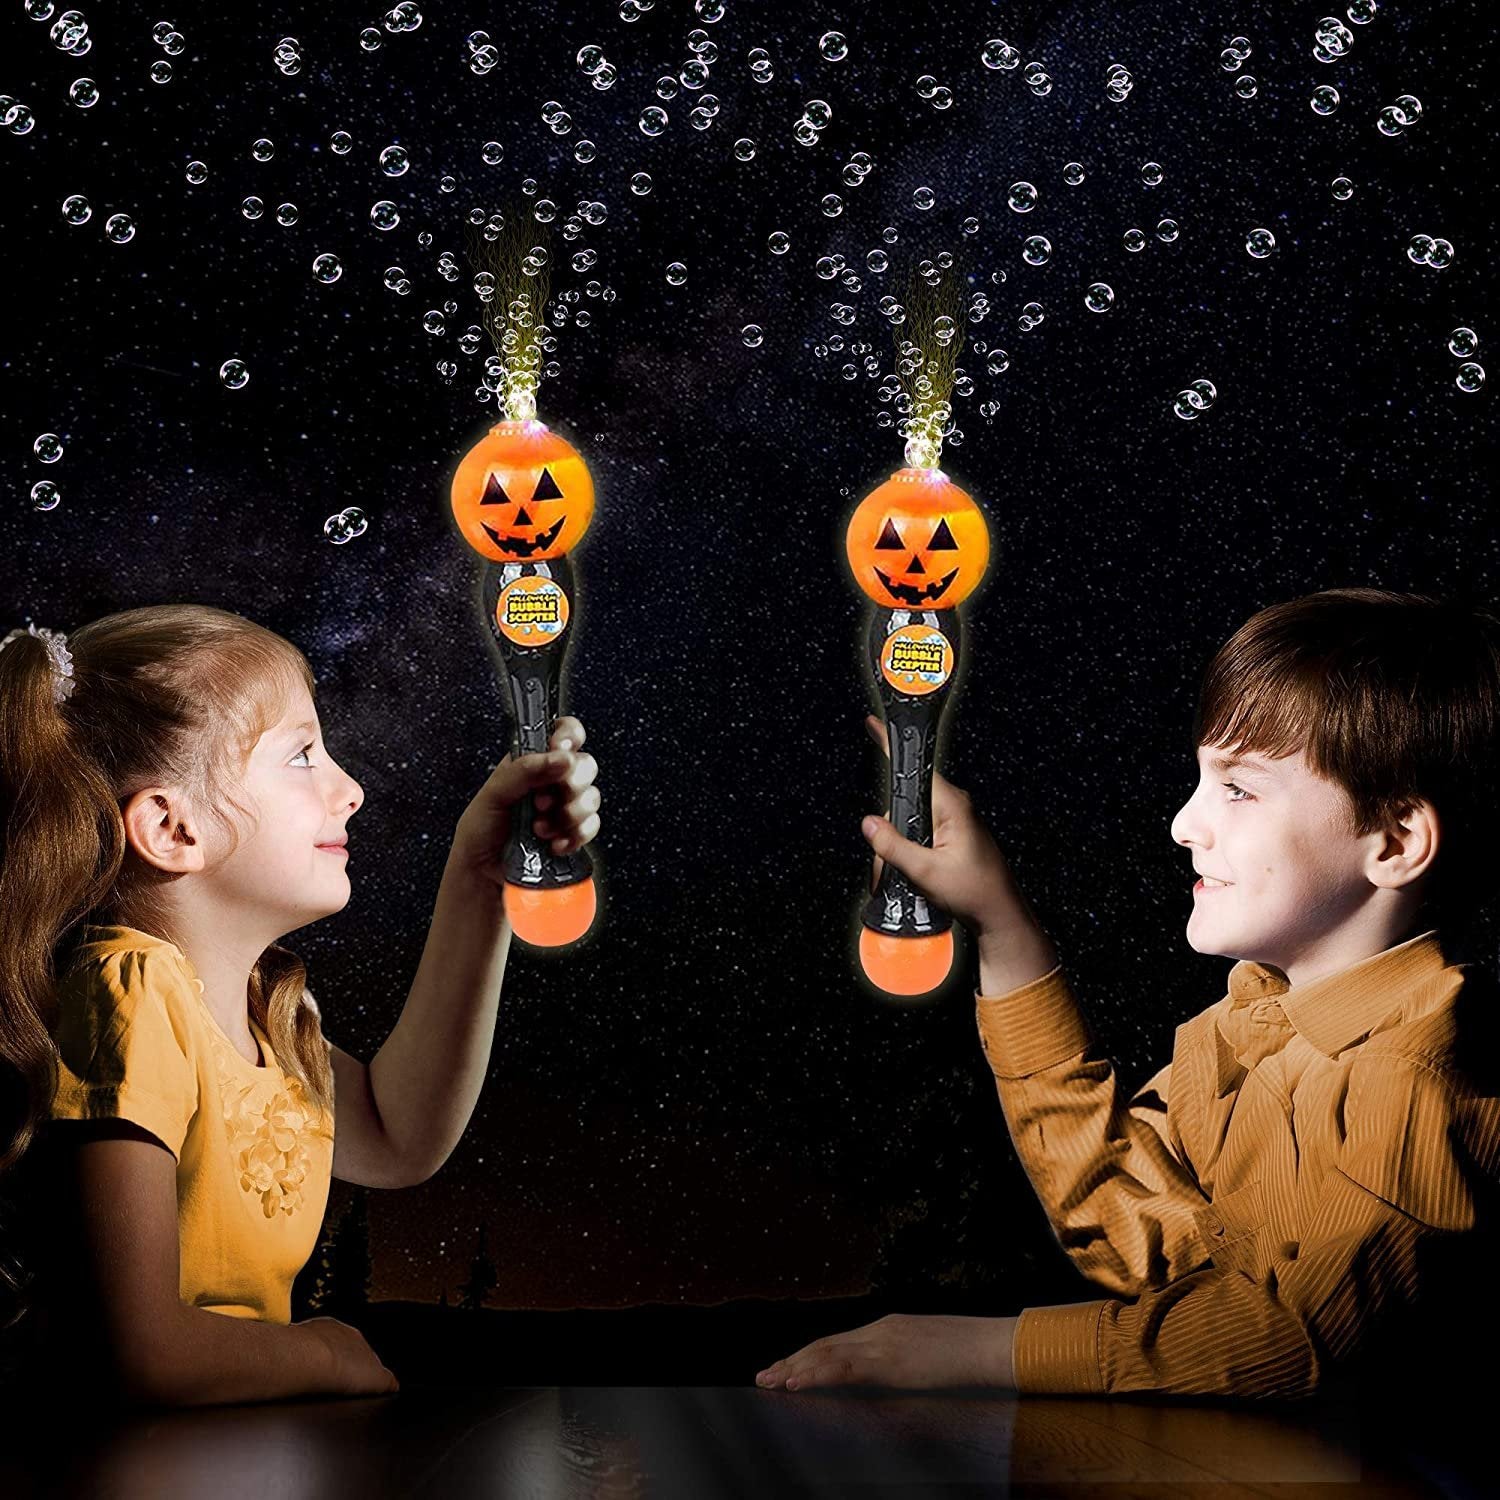 Light Up Pumpkin Bubble Blower Wand - 13.5" Illuminating Bubble Blower Wand with Thrilling LED Effect for Kids, Bubble Fluid - Batteries Included - Gift Idea, Halloween Party Favor